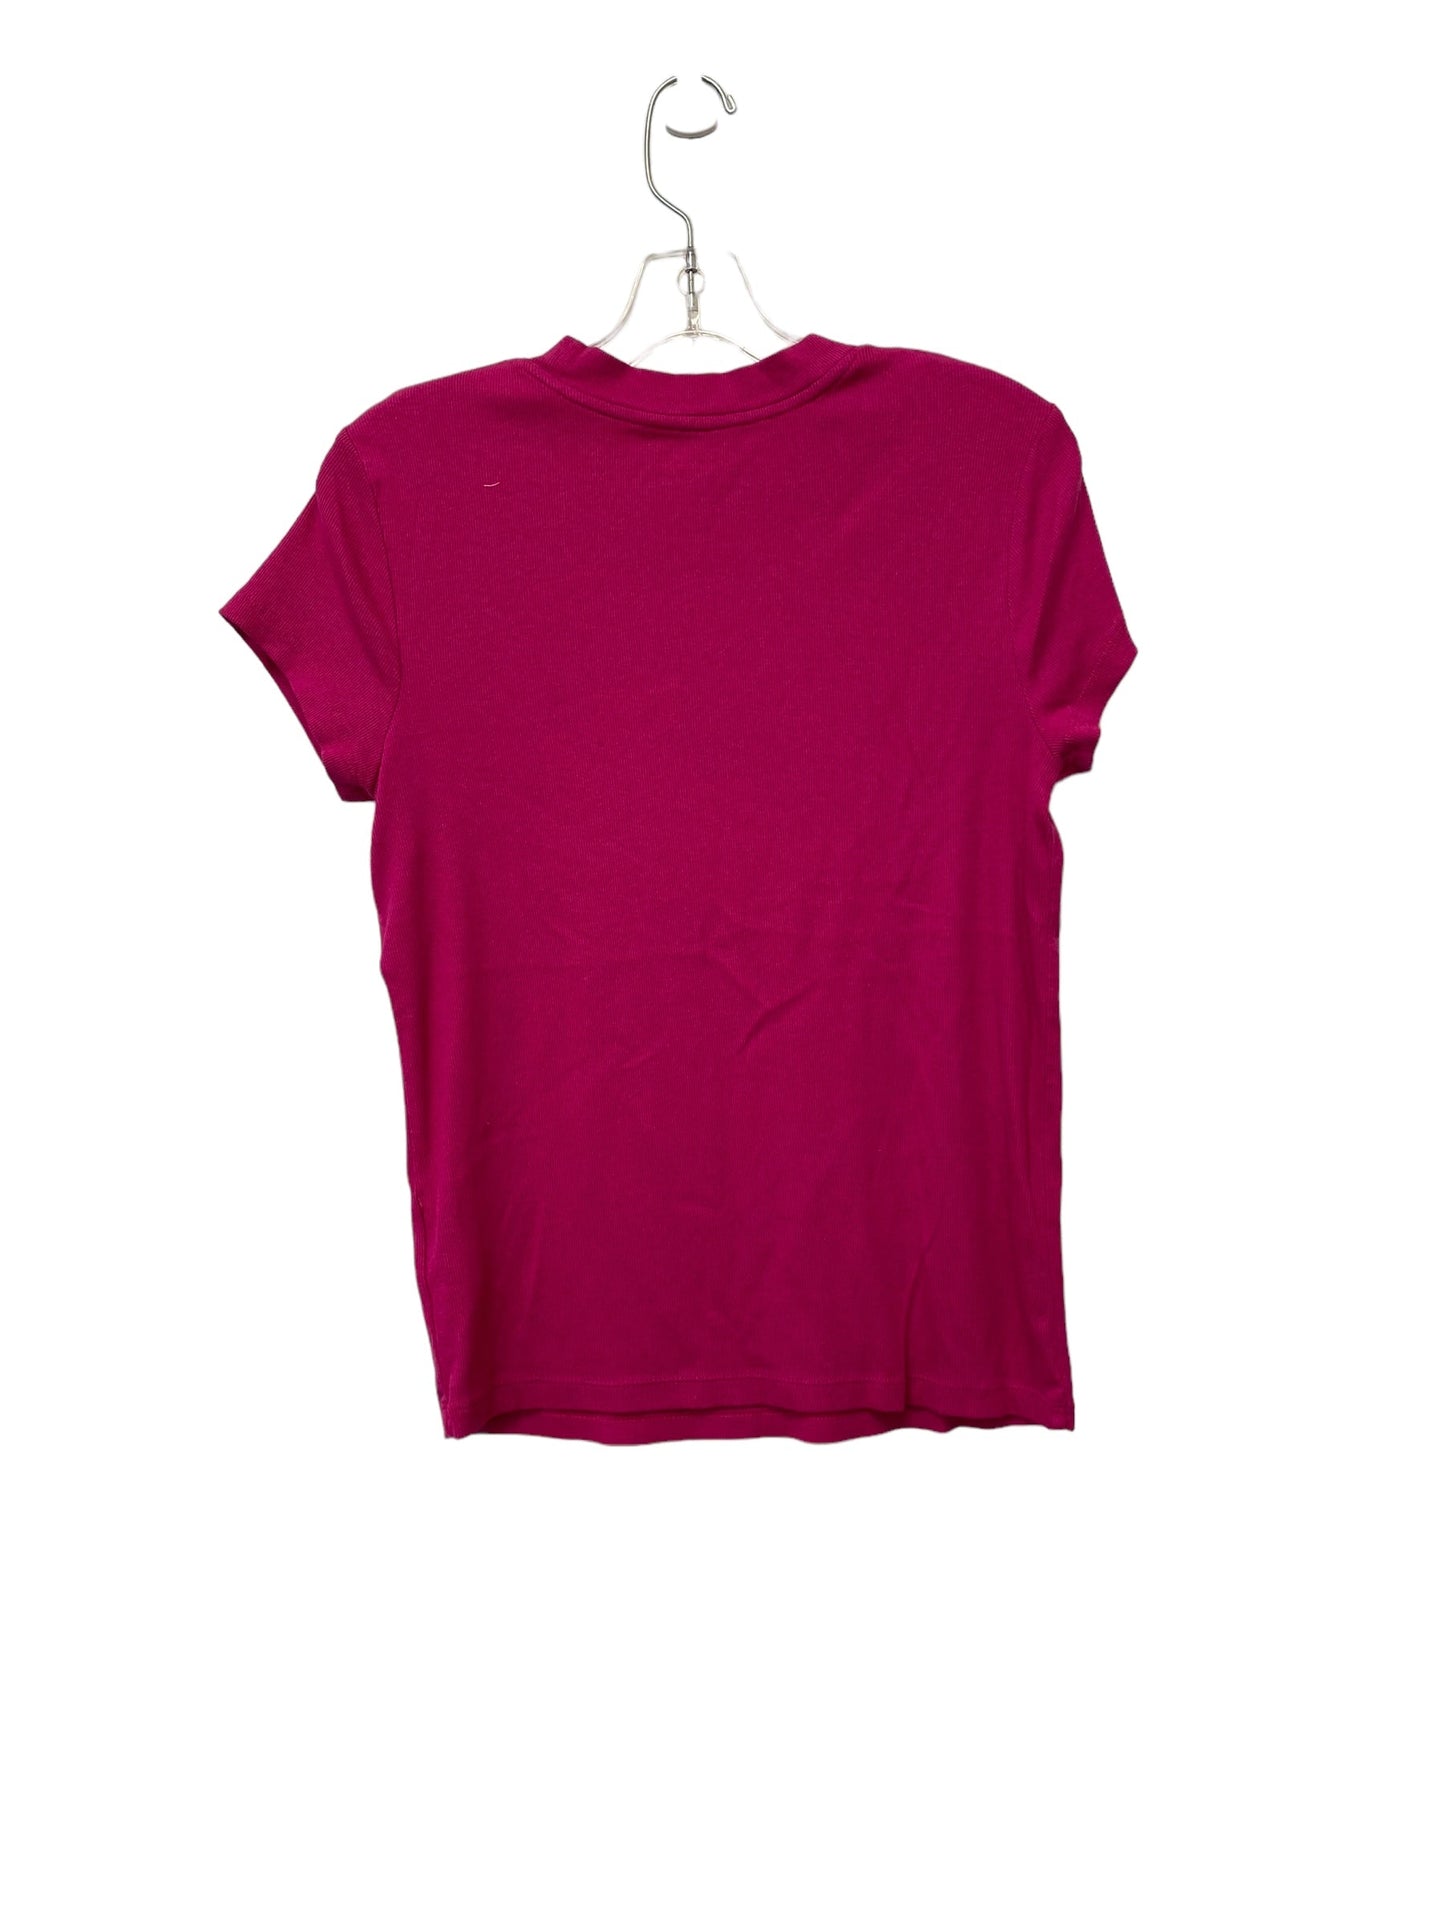 Pink Top Short Sleeve A New Day, Size L